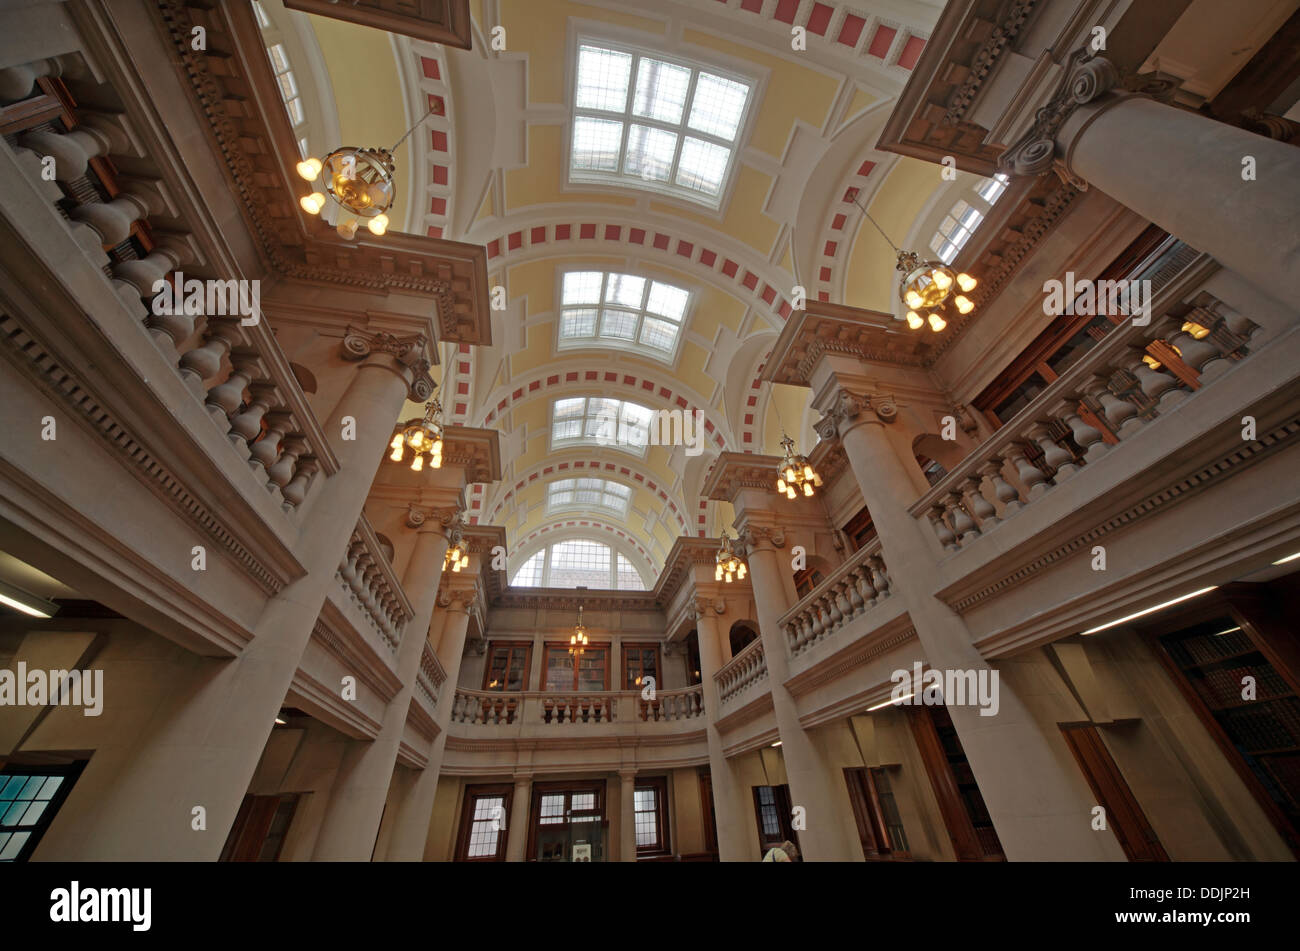 Liverpool central library Hornby rooms Stock Photo